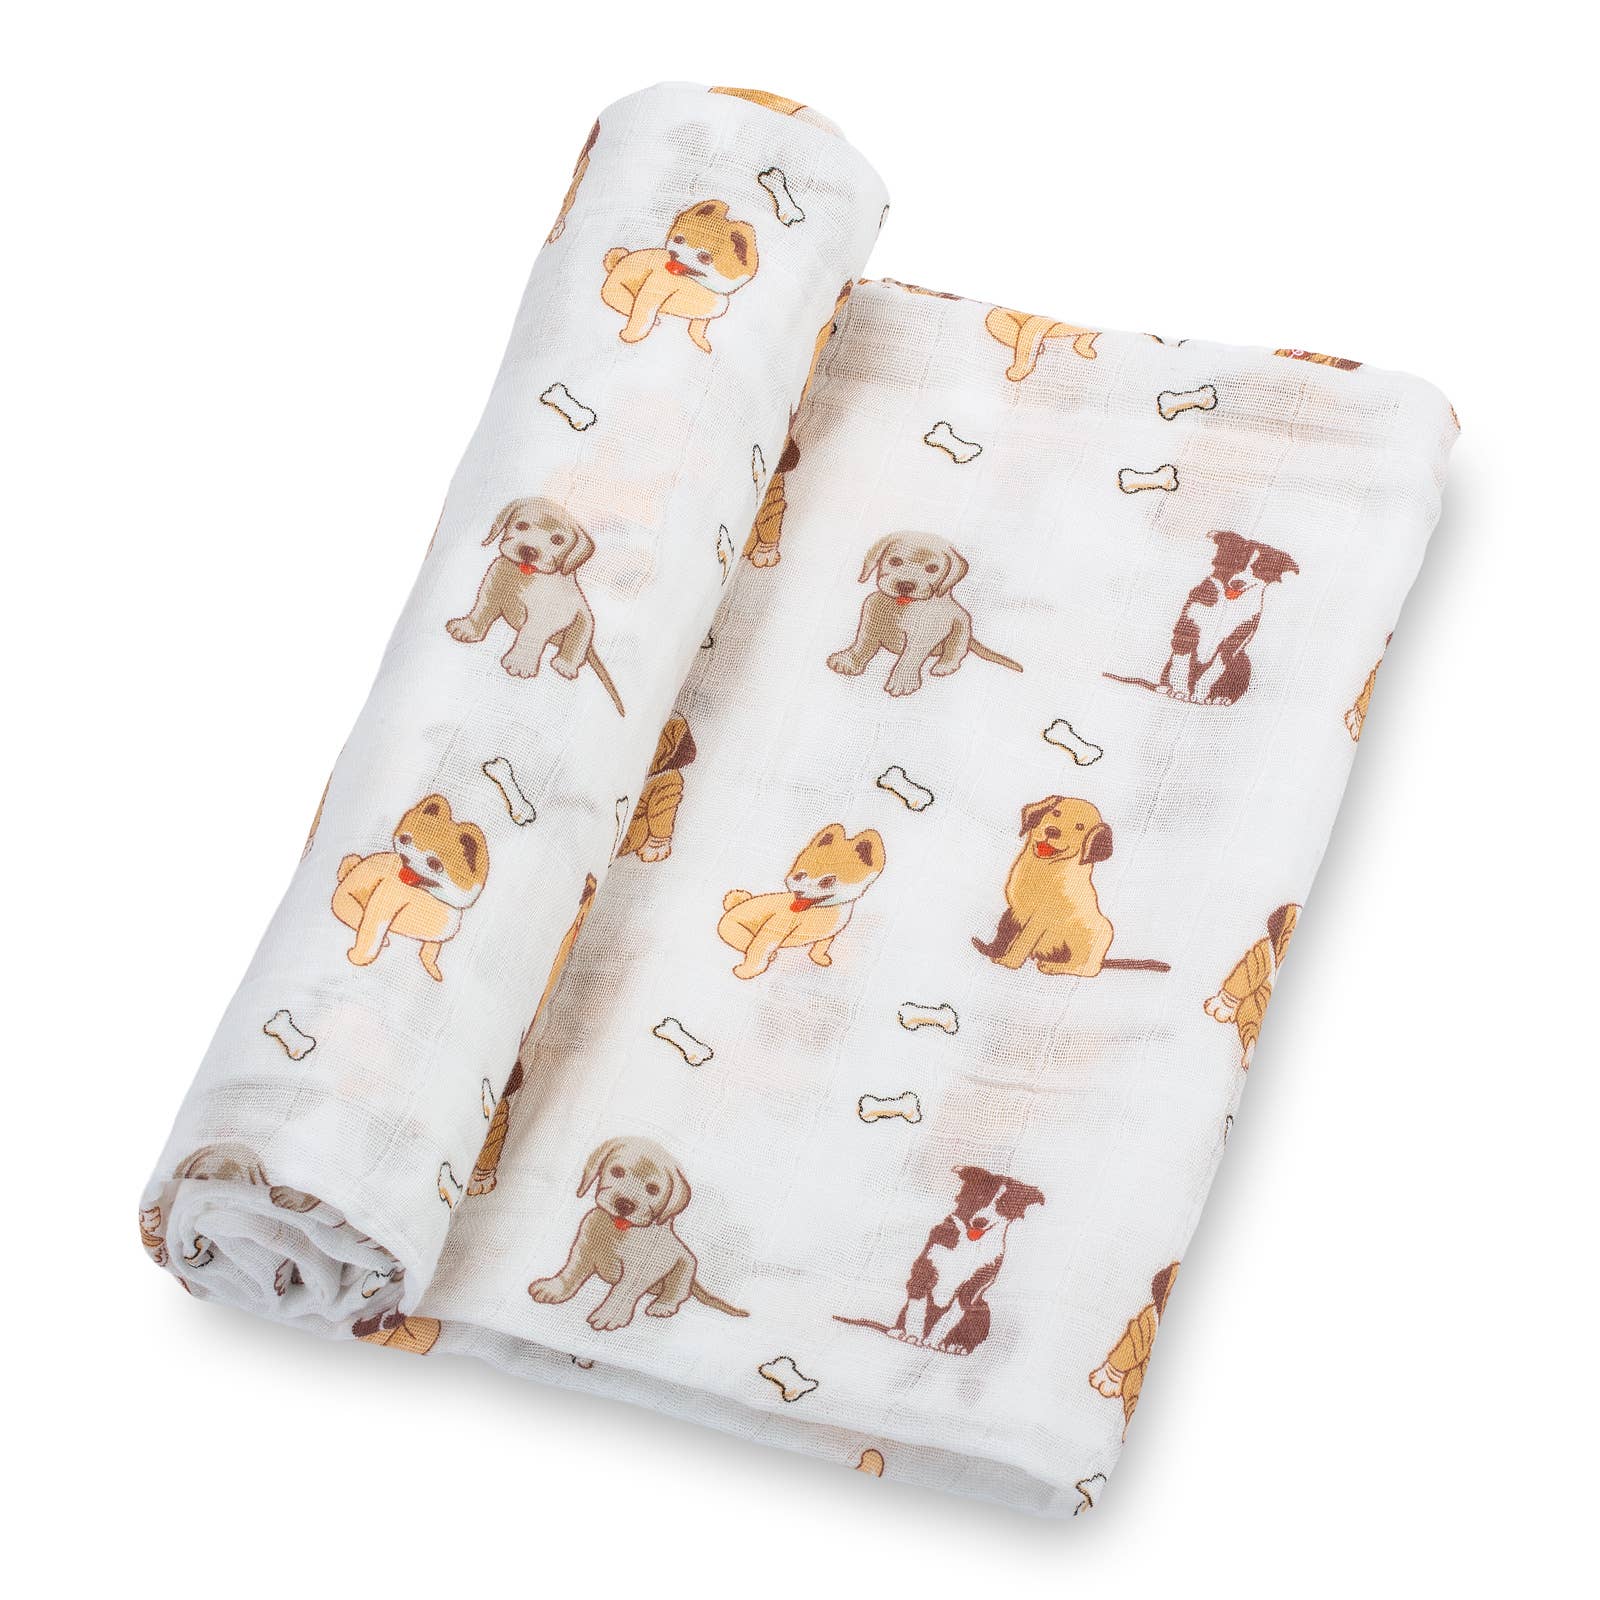 Woof Woof Baby Swaddle Blanket - Gift & Gather